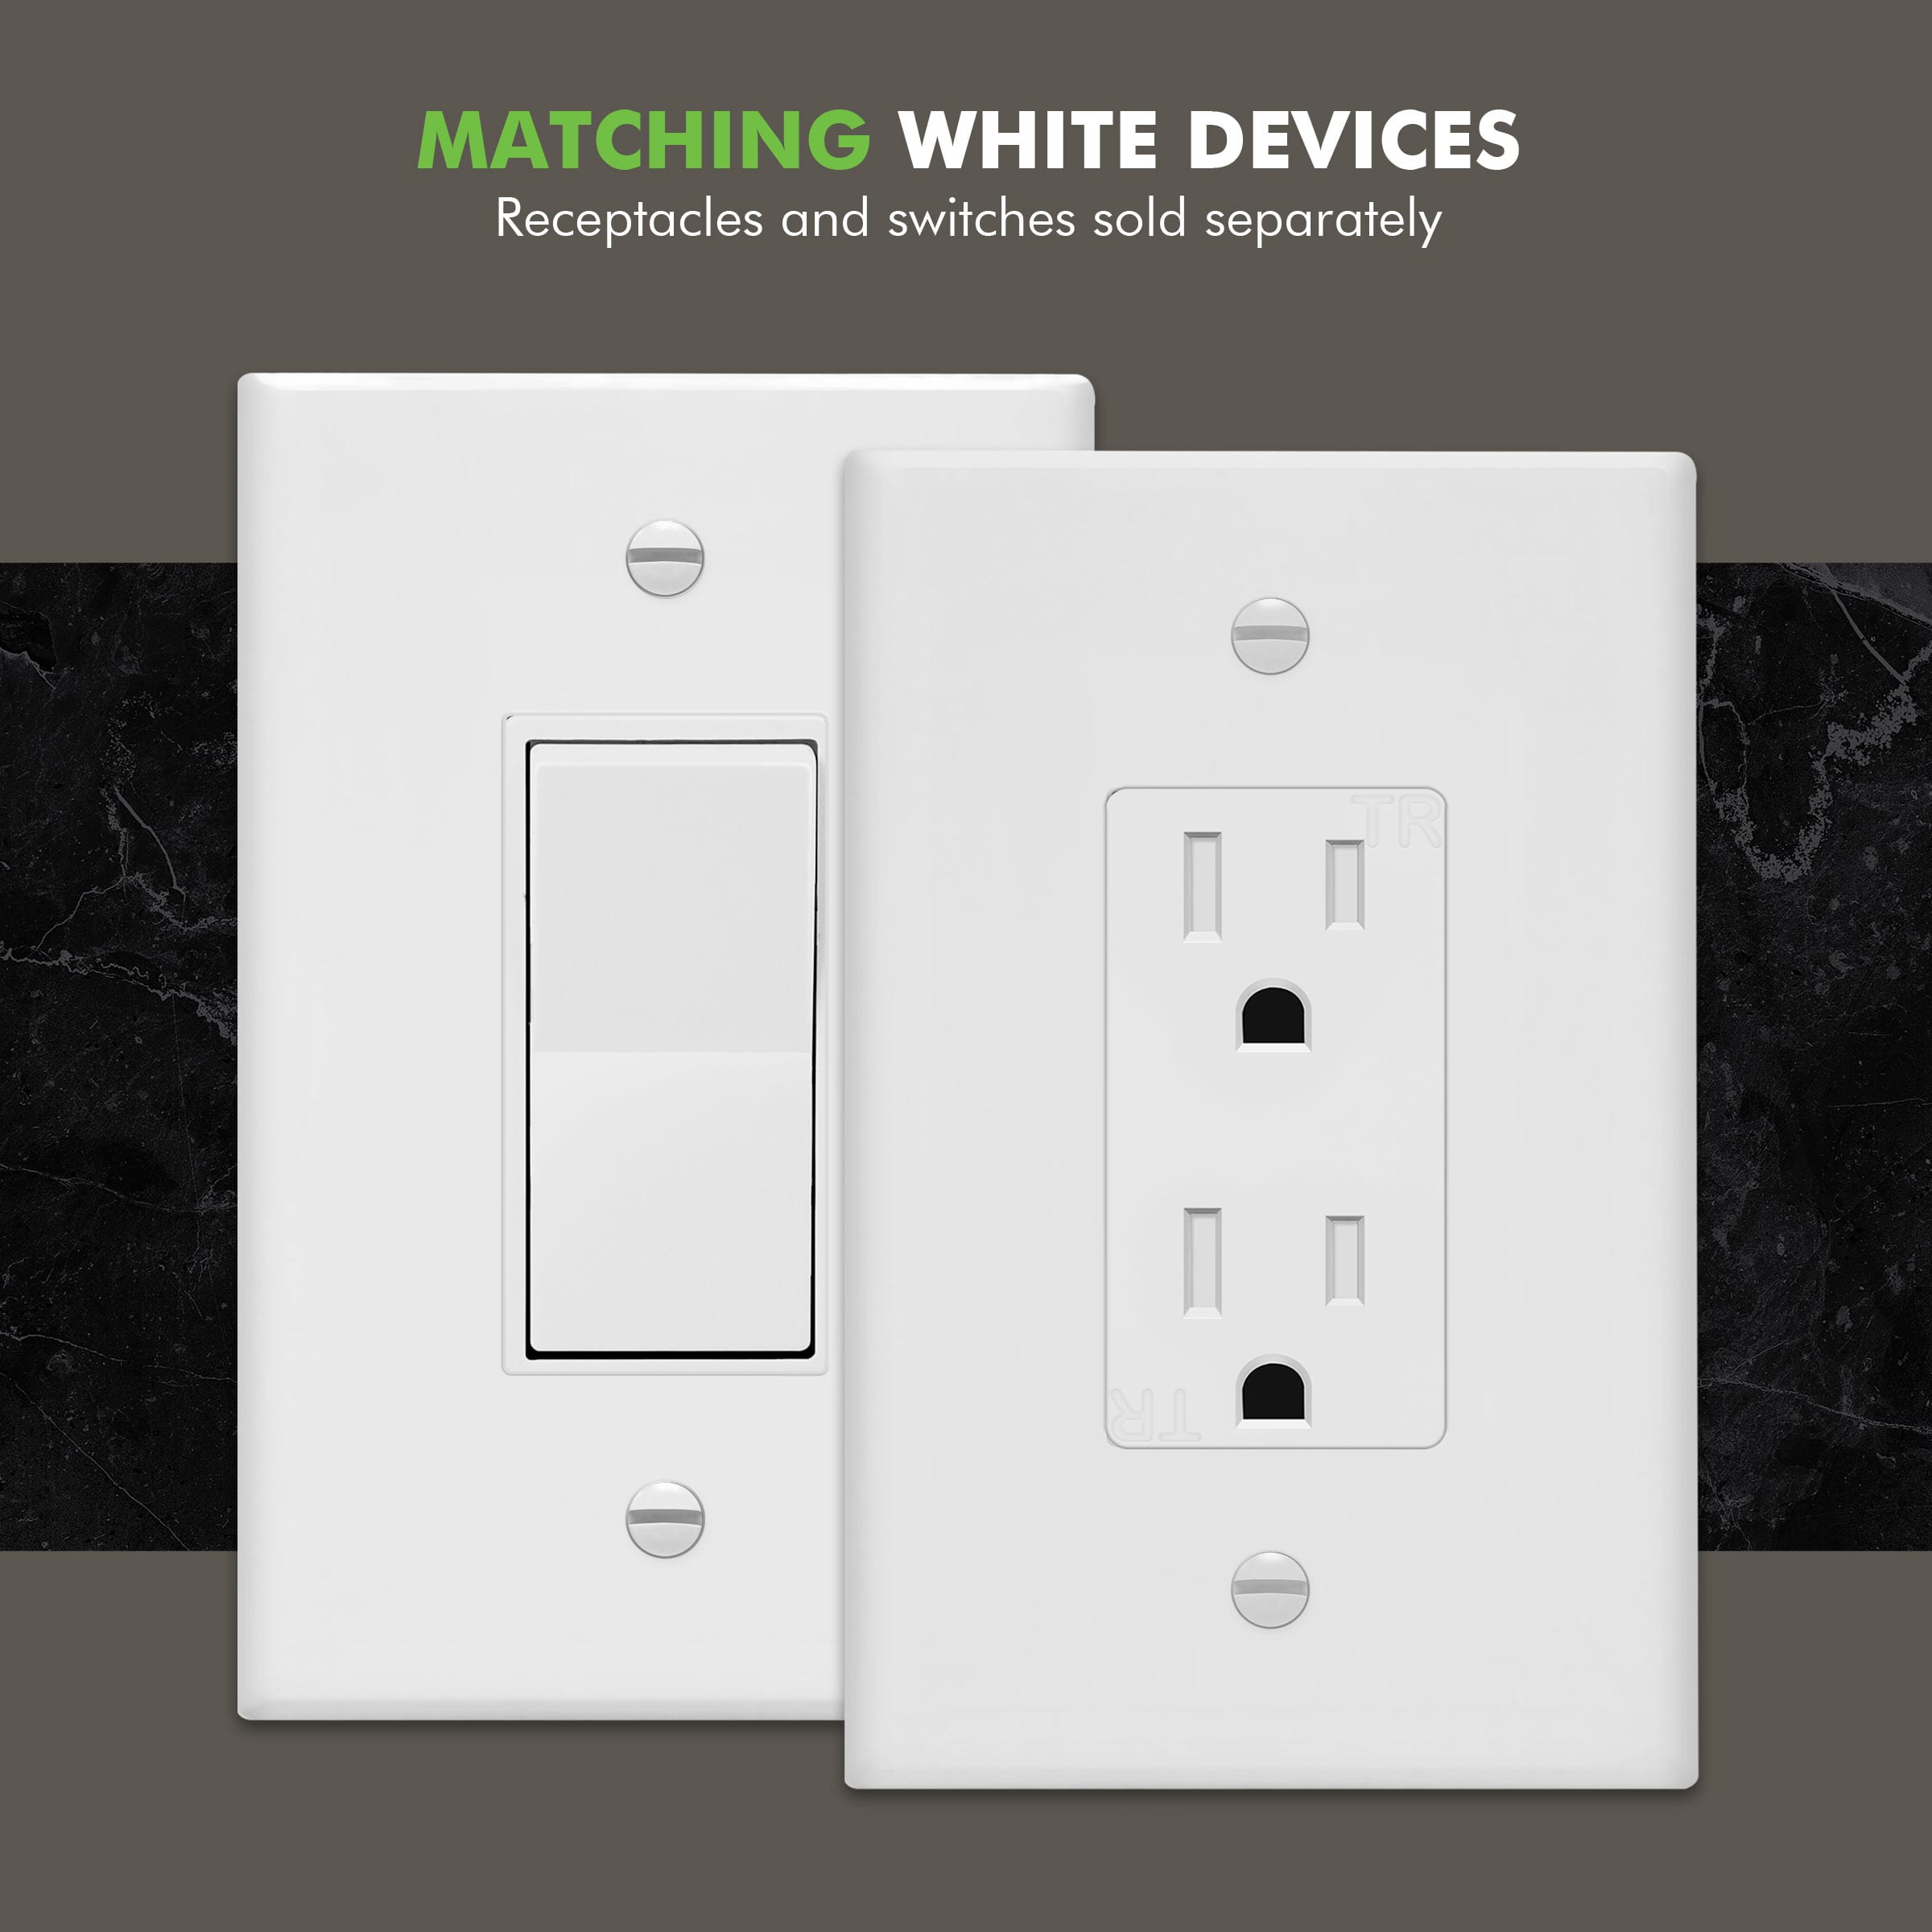 1-Gang Oversize Decorator/GFCI Outlet Wall Plate